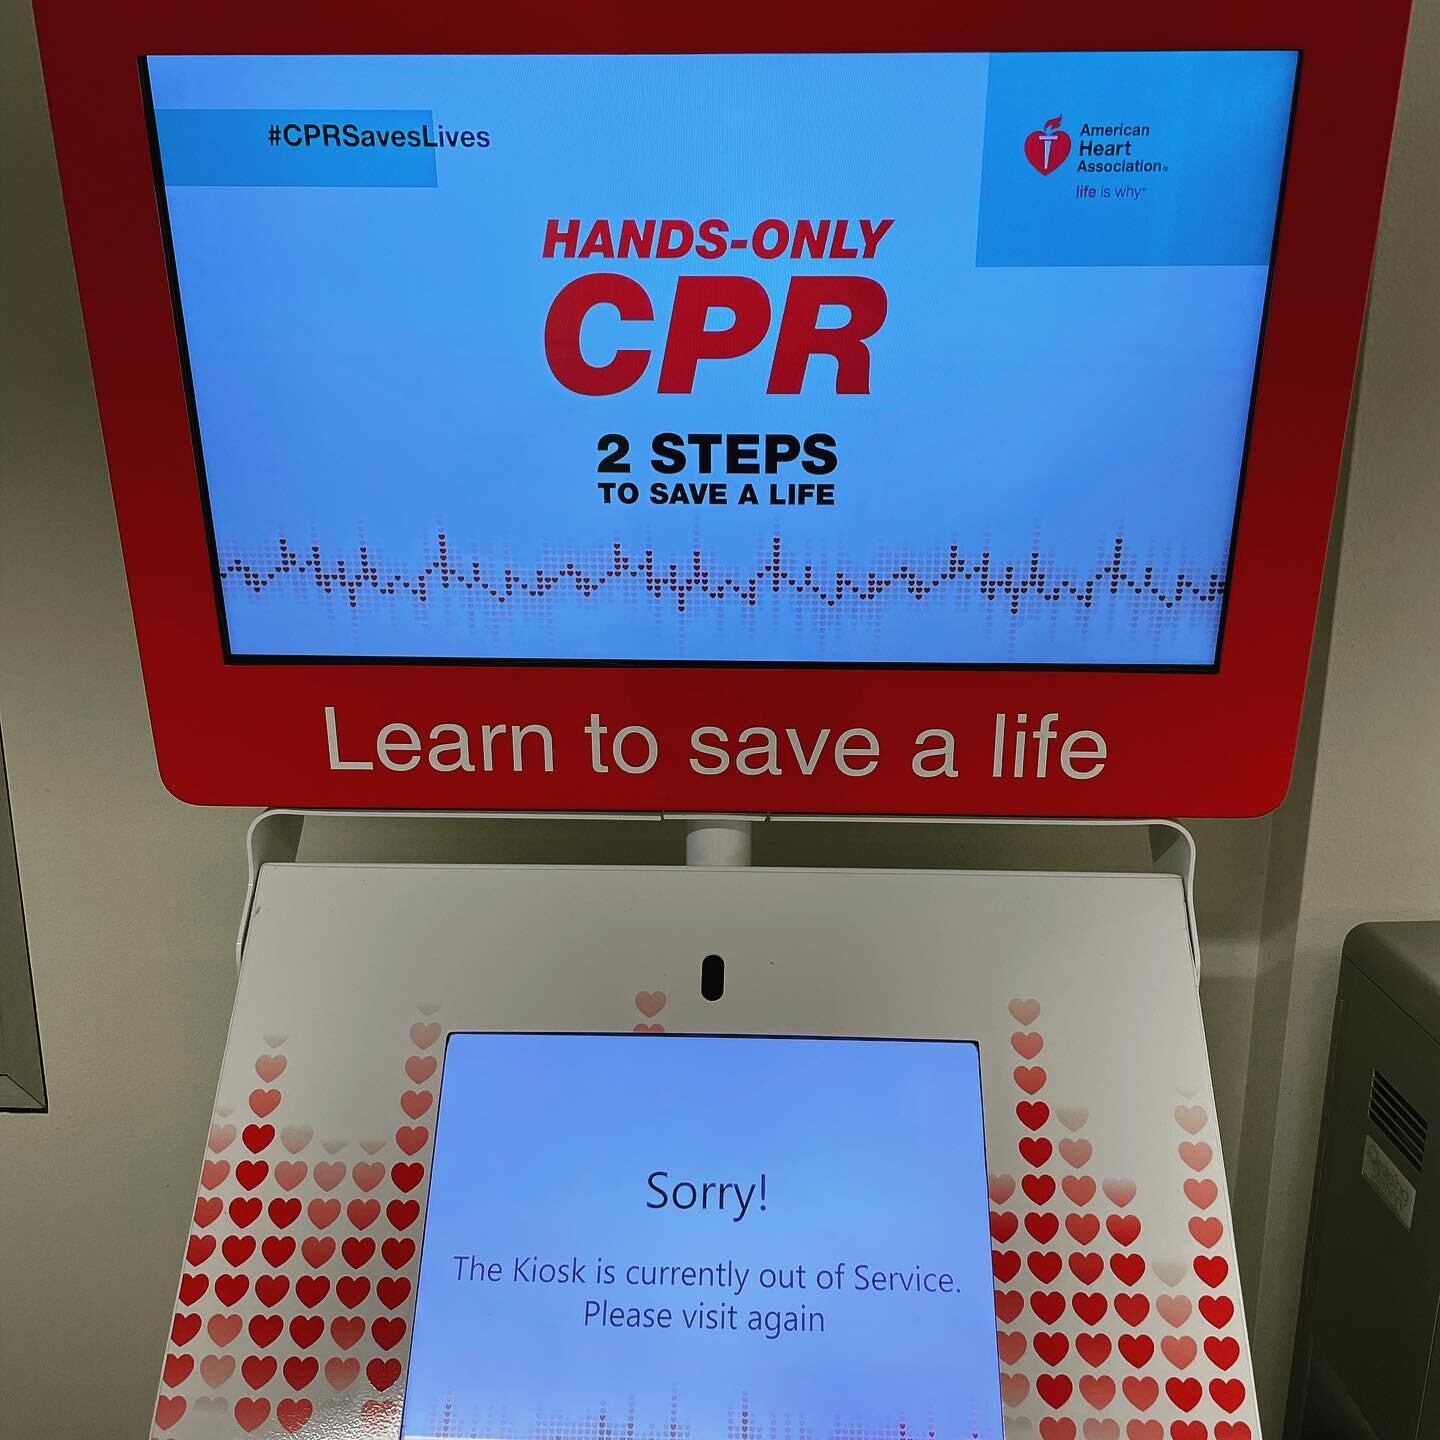 CPR machine out of order. That would be my luck if I needed CPR&hellip;